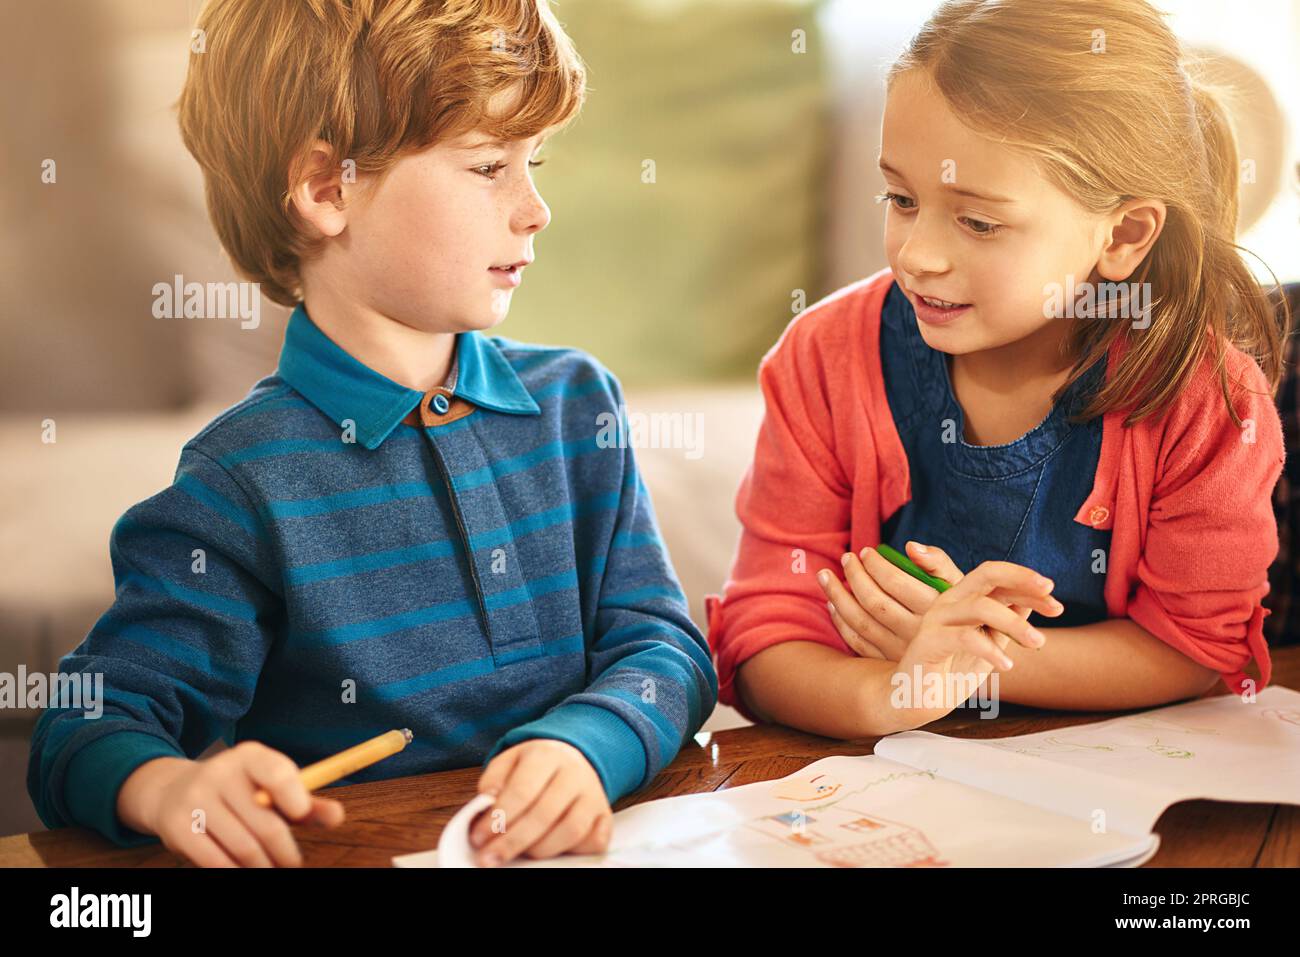 Colouring fun with little sister. a brother and sister colouring in together. Stock Photo